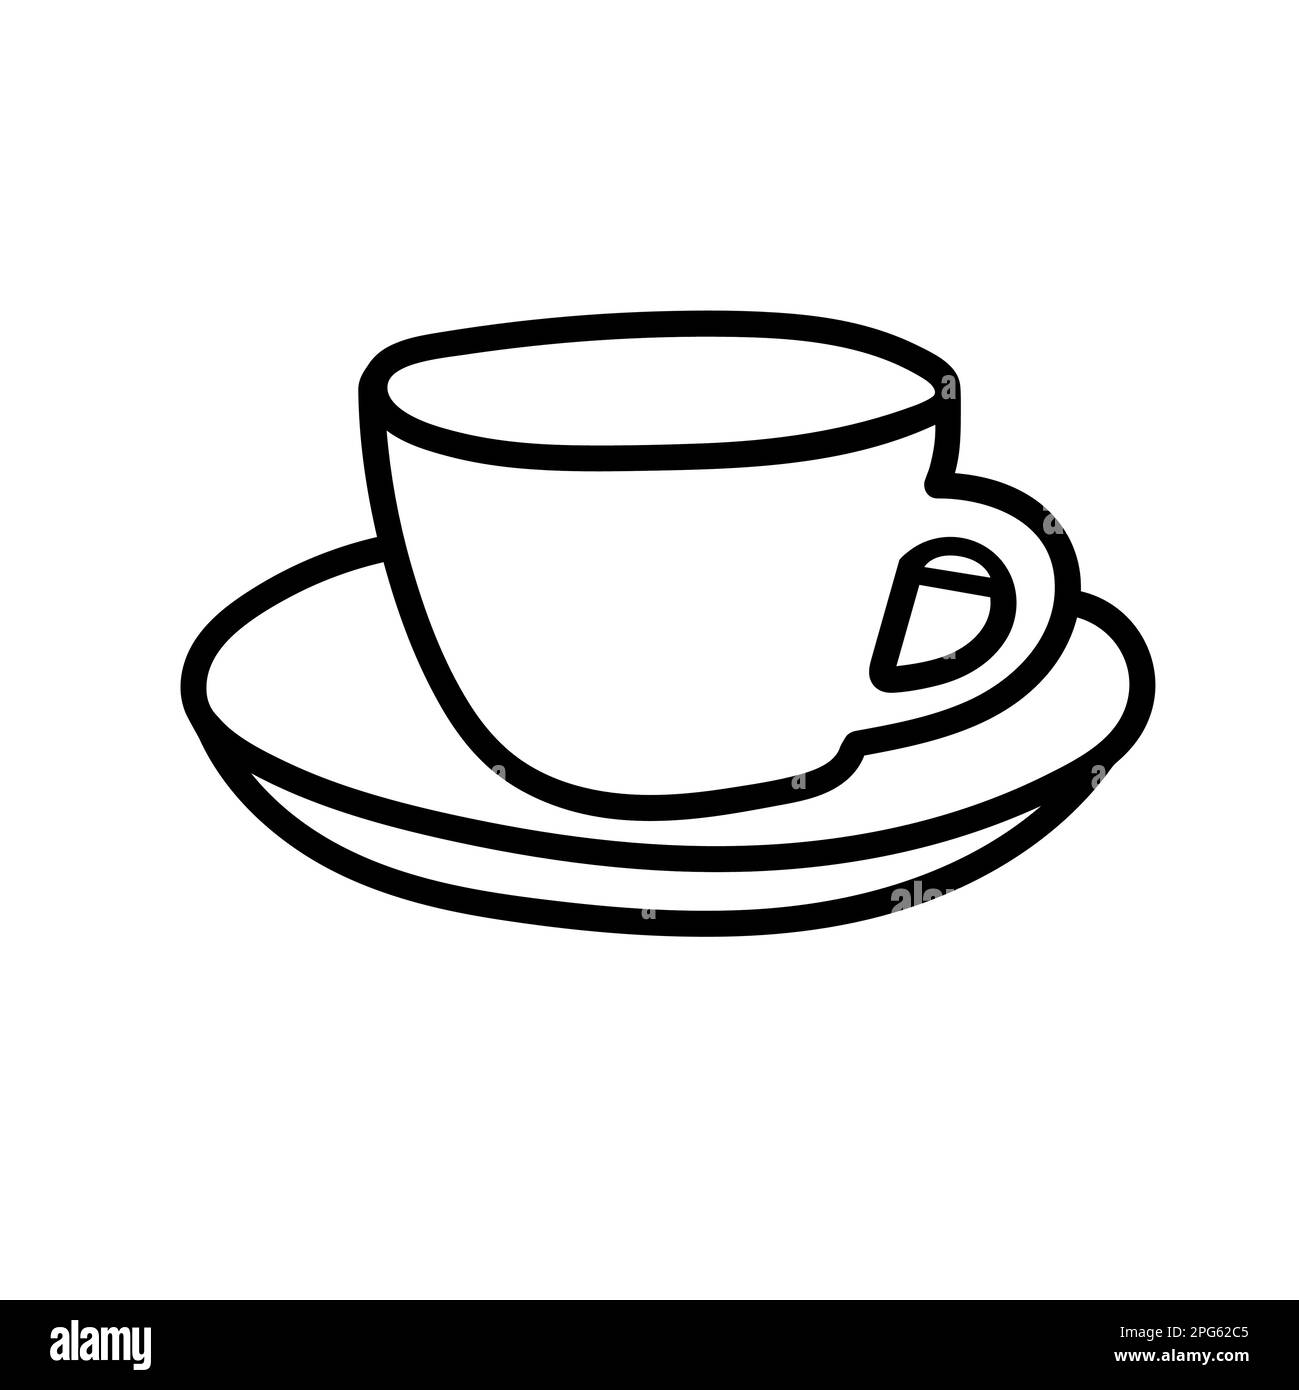 CERAMIC CUP FOR TEA OR COFFEE, HAND DRAWING WITH BLACK OUTLINE Stock Vector